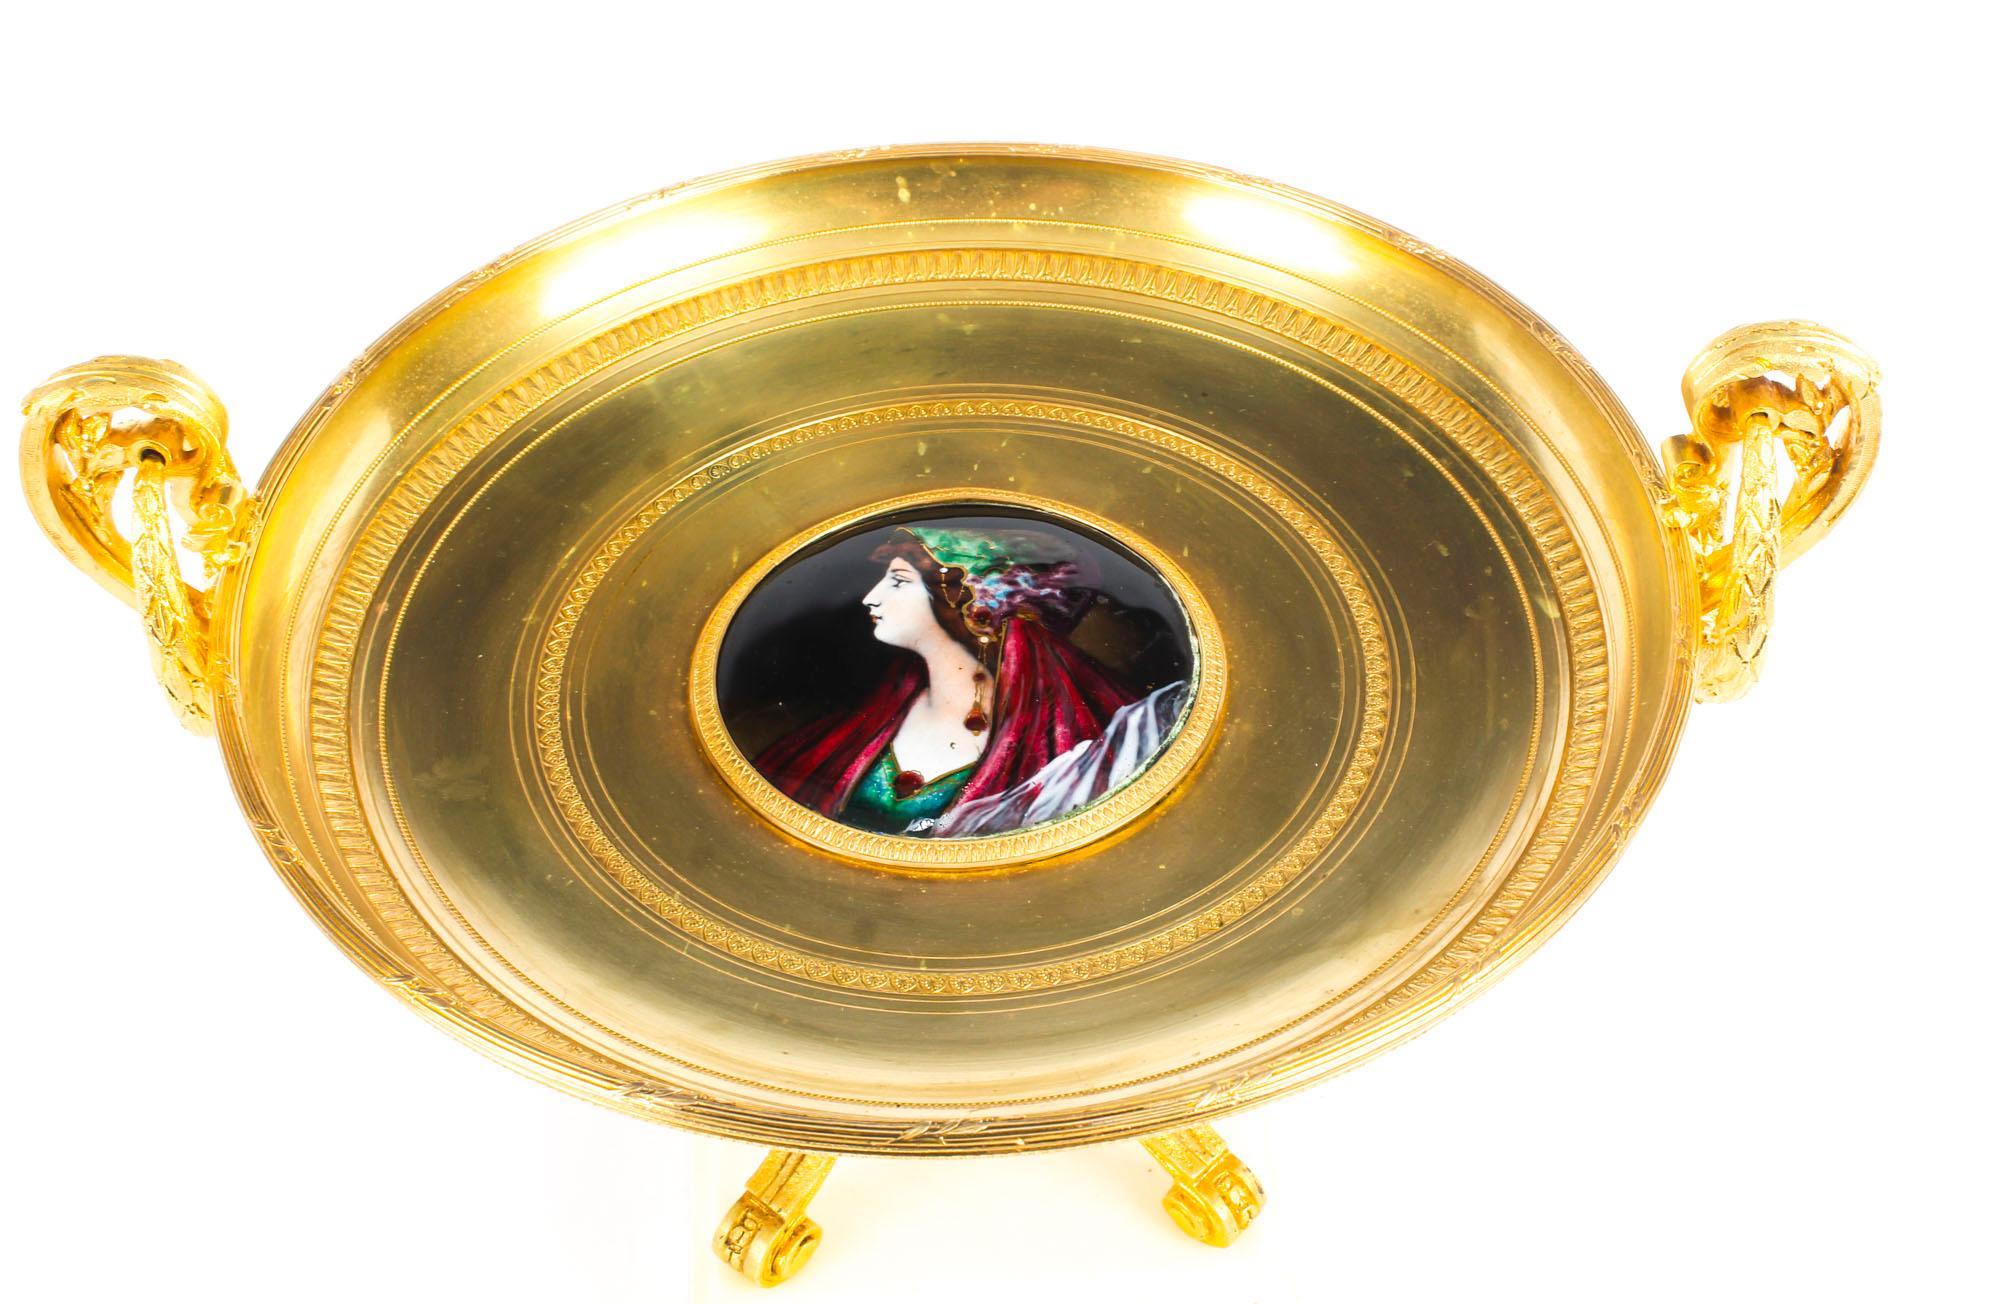 Antique French Ormolu Tazza with Limoges Enamel Plaque, 19th Century In Excellent Condition For Sale In London, GB